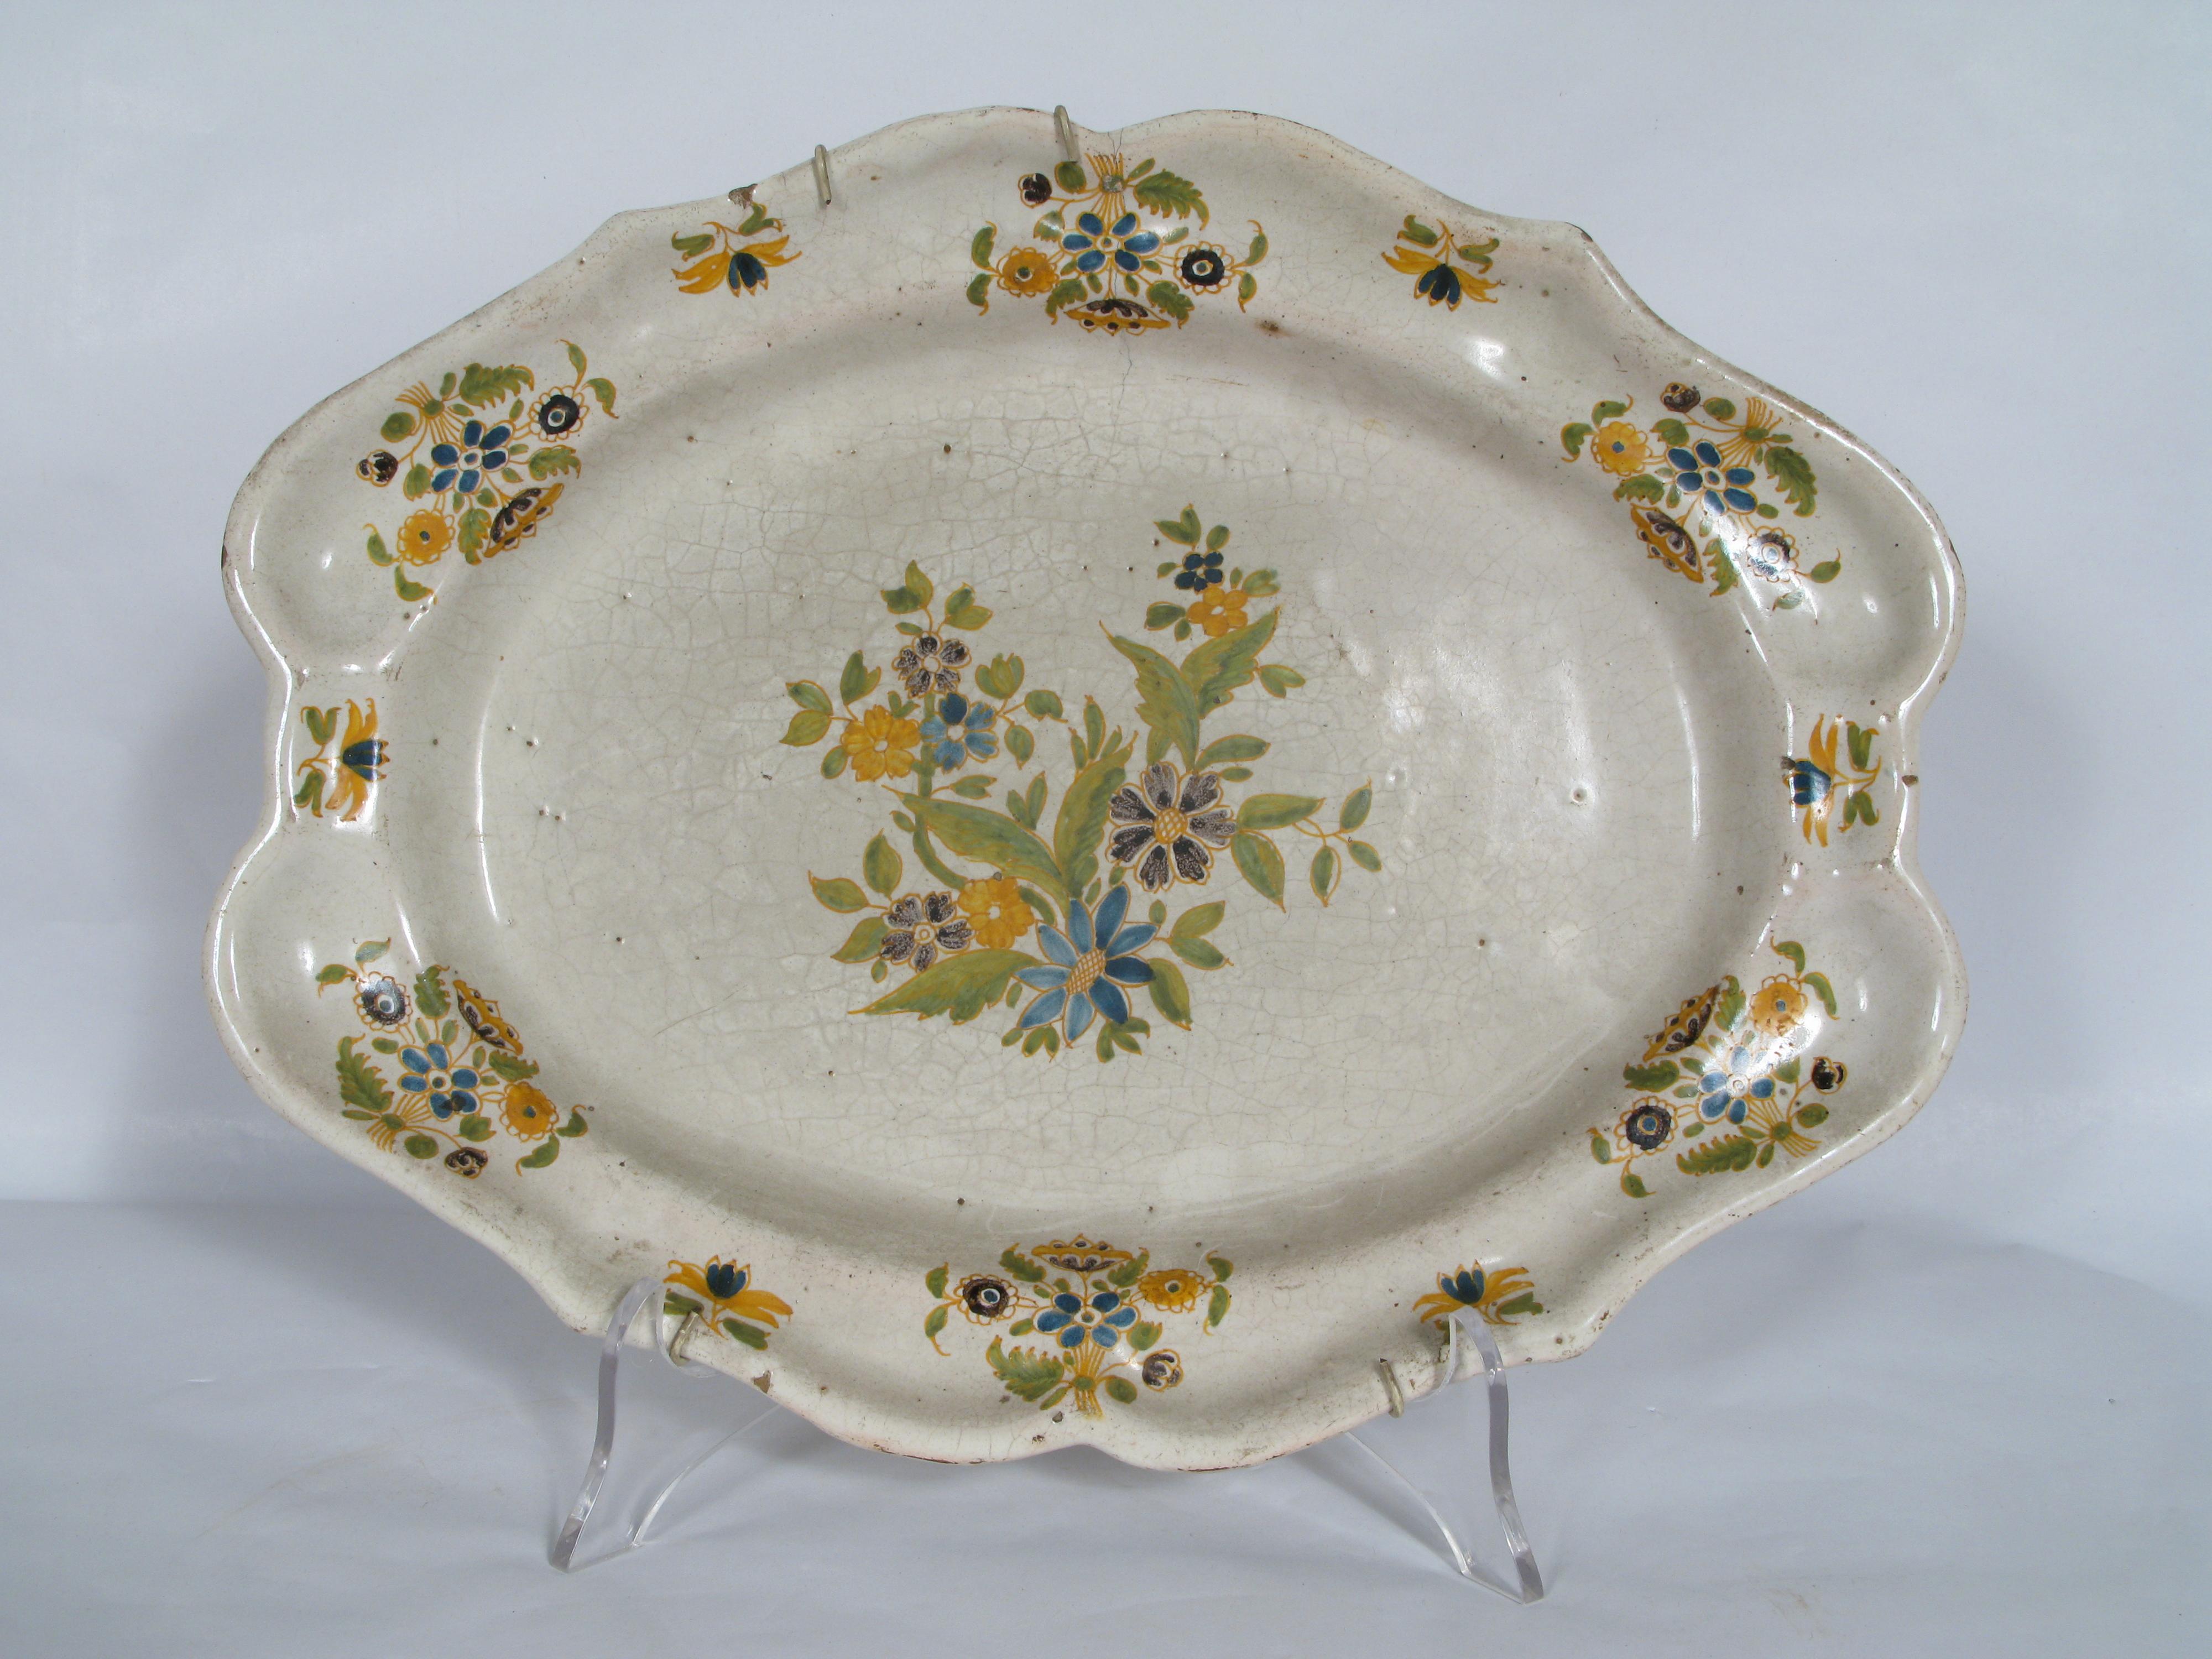 Majolica tray, Lombardy 19th century

Elegant majolica tray with mixtilinear border and floral decorations. 

Dimensions 36.7 x 28 x 4 cm

The work, like any of our other objects, will be sold accompanied by a certificate of authenticity.

In case